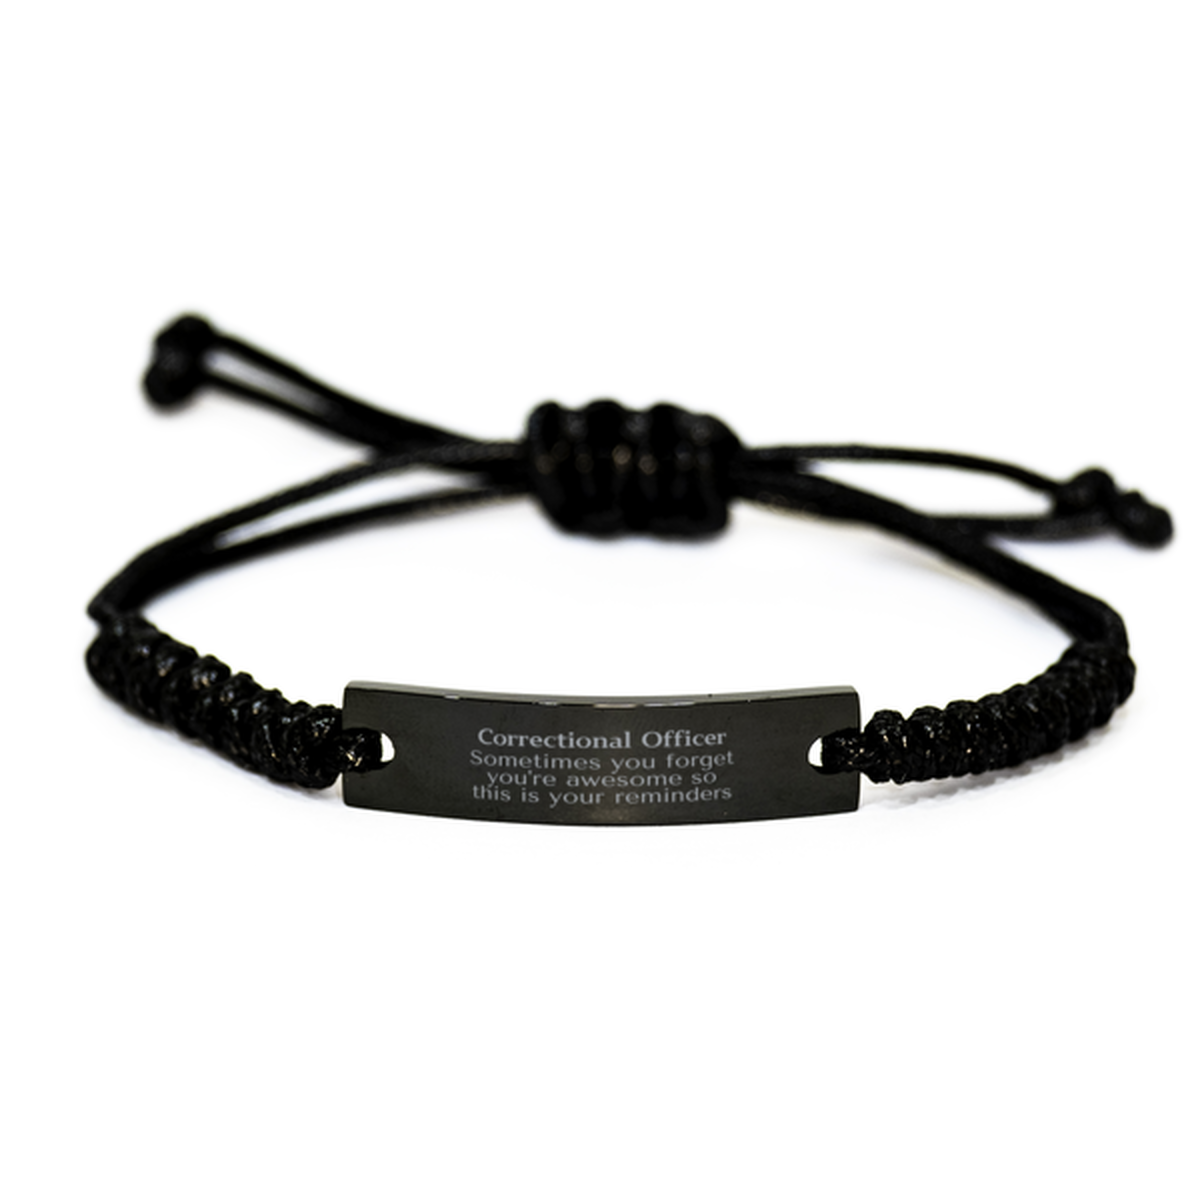 Sentimental Correctional Officer Black Rope Bracelet, Correctional Officer Sometimes you forget you're awesome so this is your reminders, Graduation Christmas Birthday Gifts for Correctional Officer, Men, Women, Coworkers